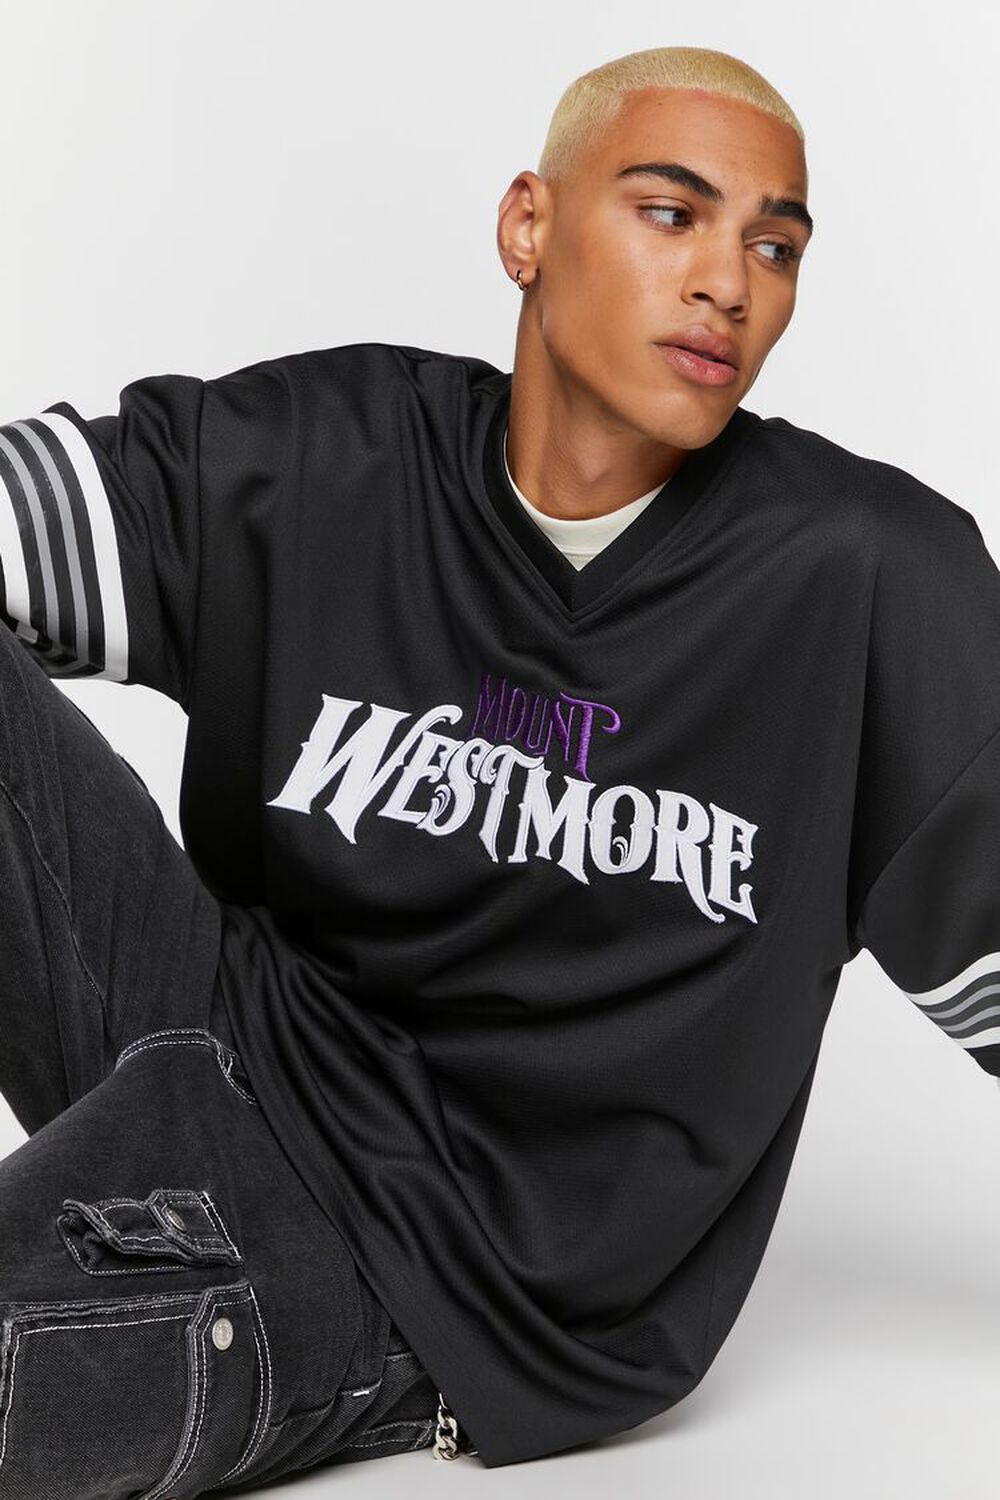 Mount Westmore Embroidered Varsity Tee, image 1